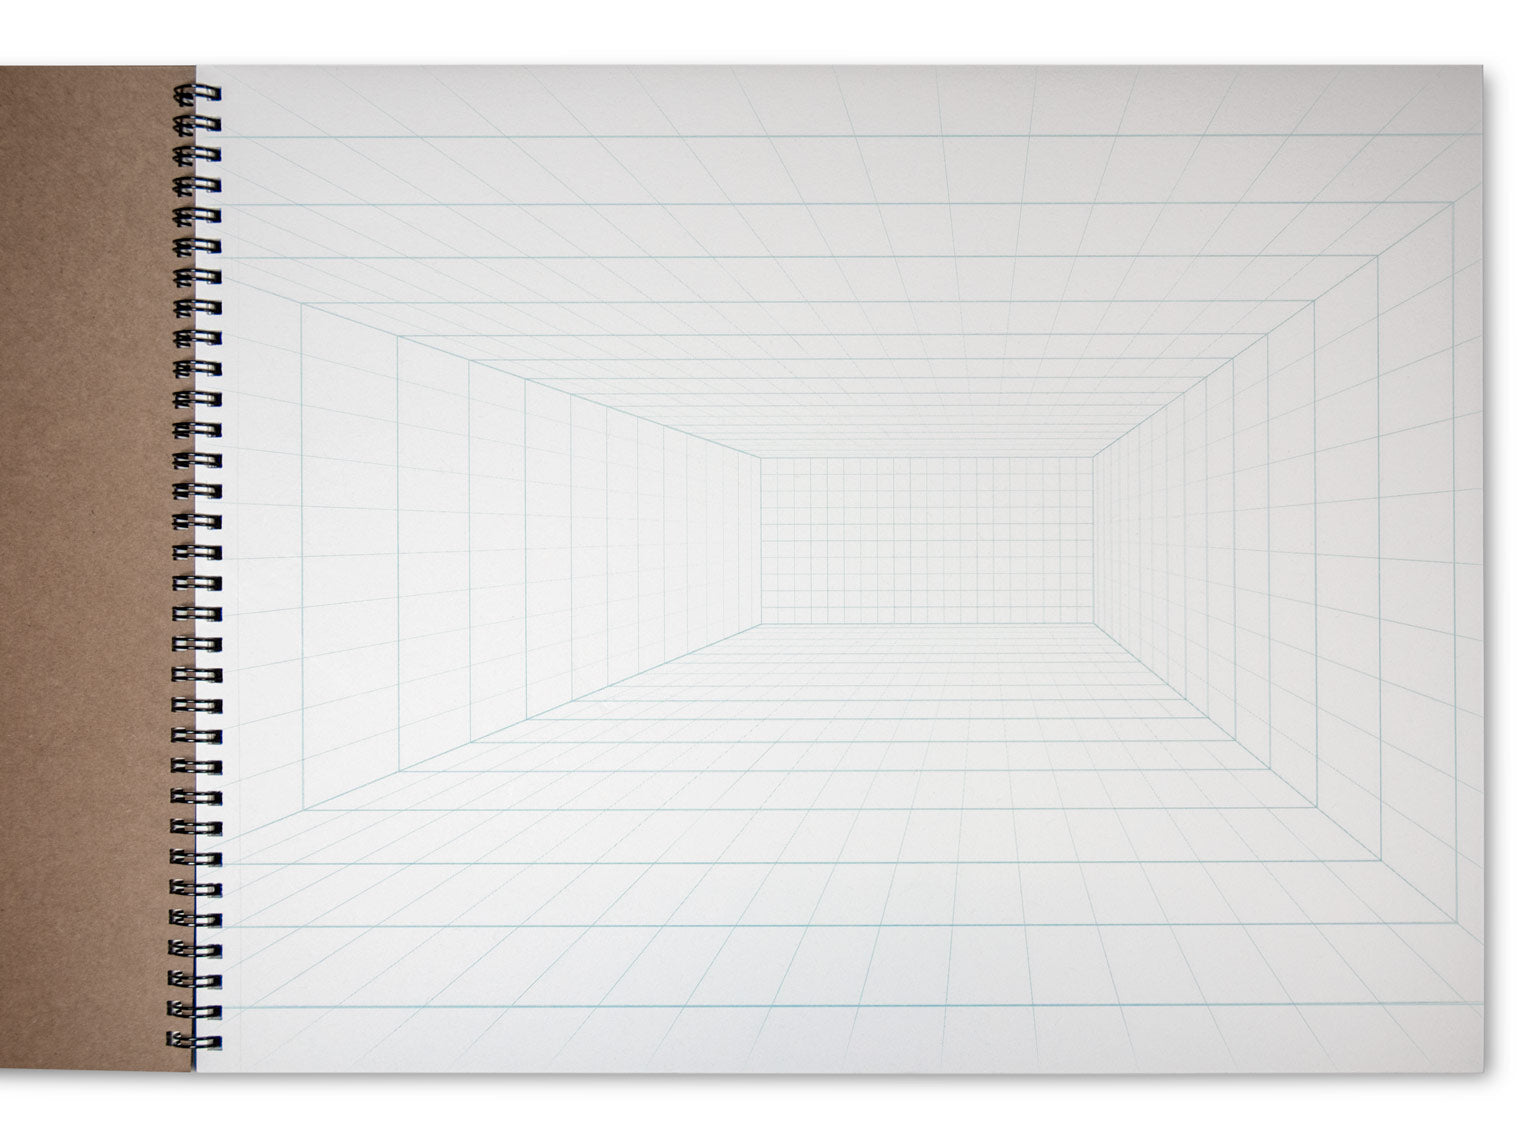 Koala Tools - 40-Sheet Sketch Pad for 2-Point Perspective Drawing, Spiral Bound